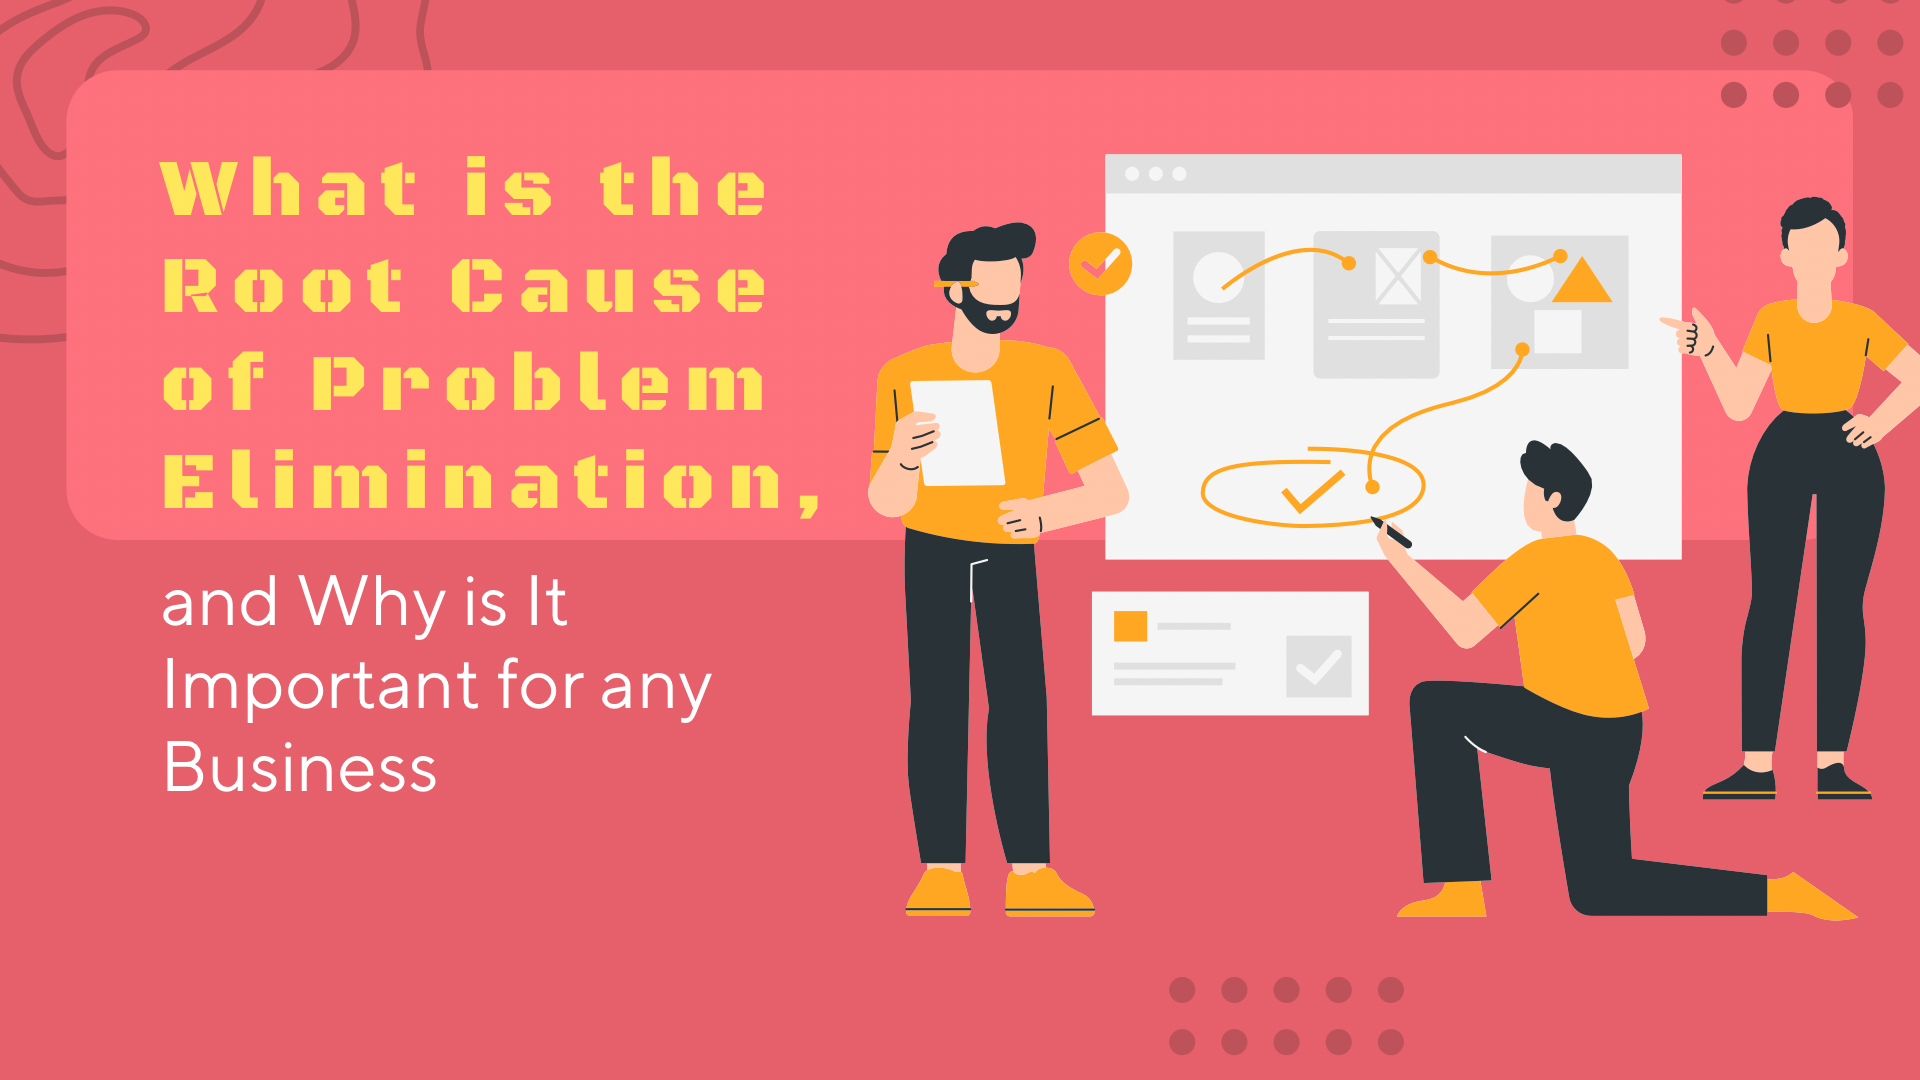 What is the Root Cause of Problem Elimination And Why is It Important for any Business?